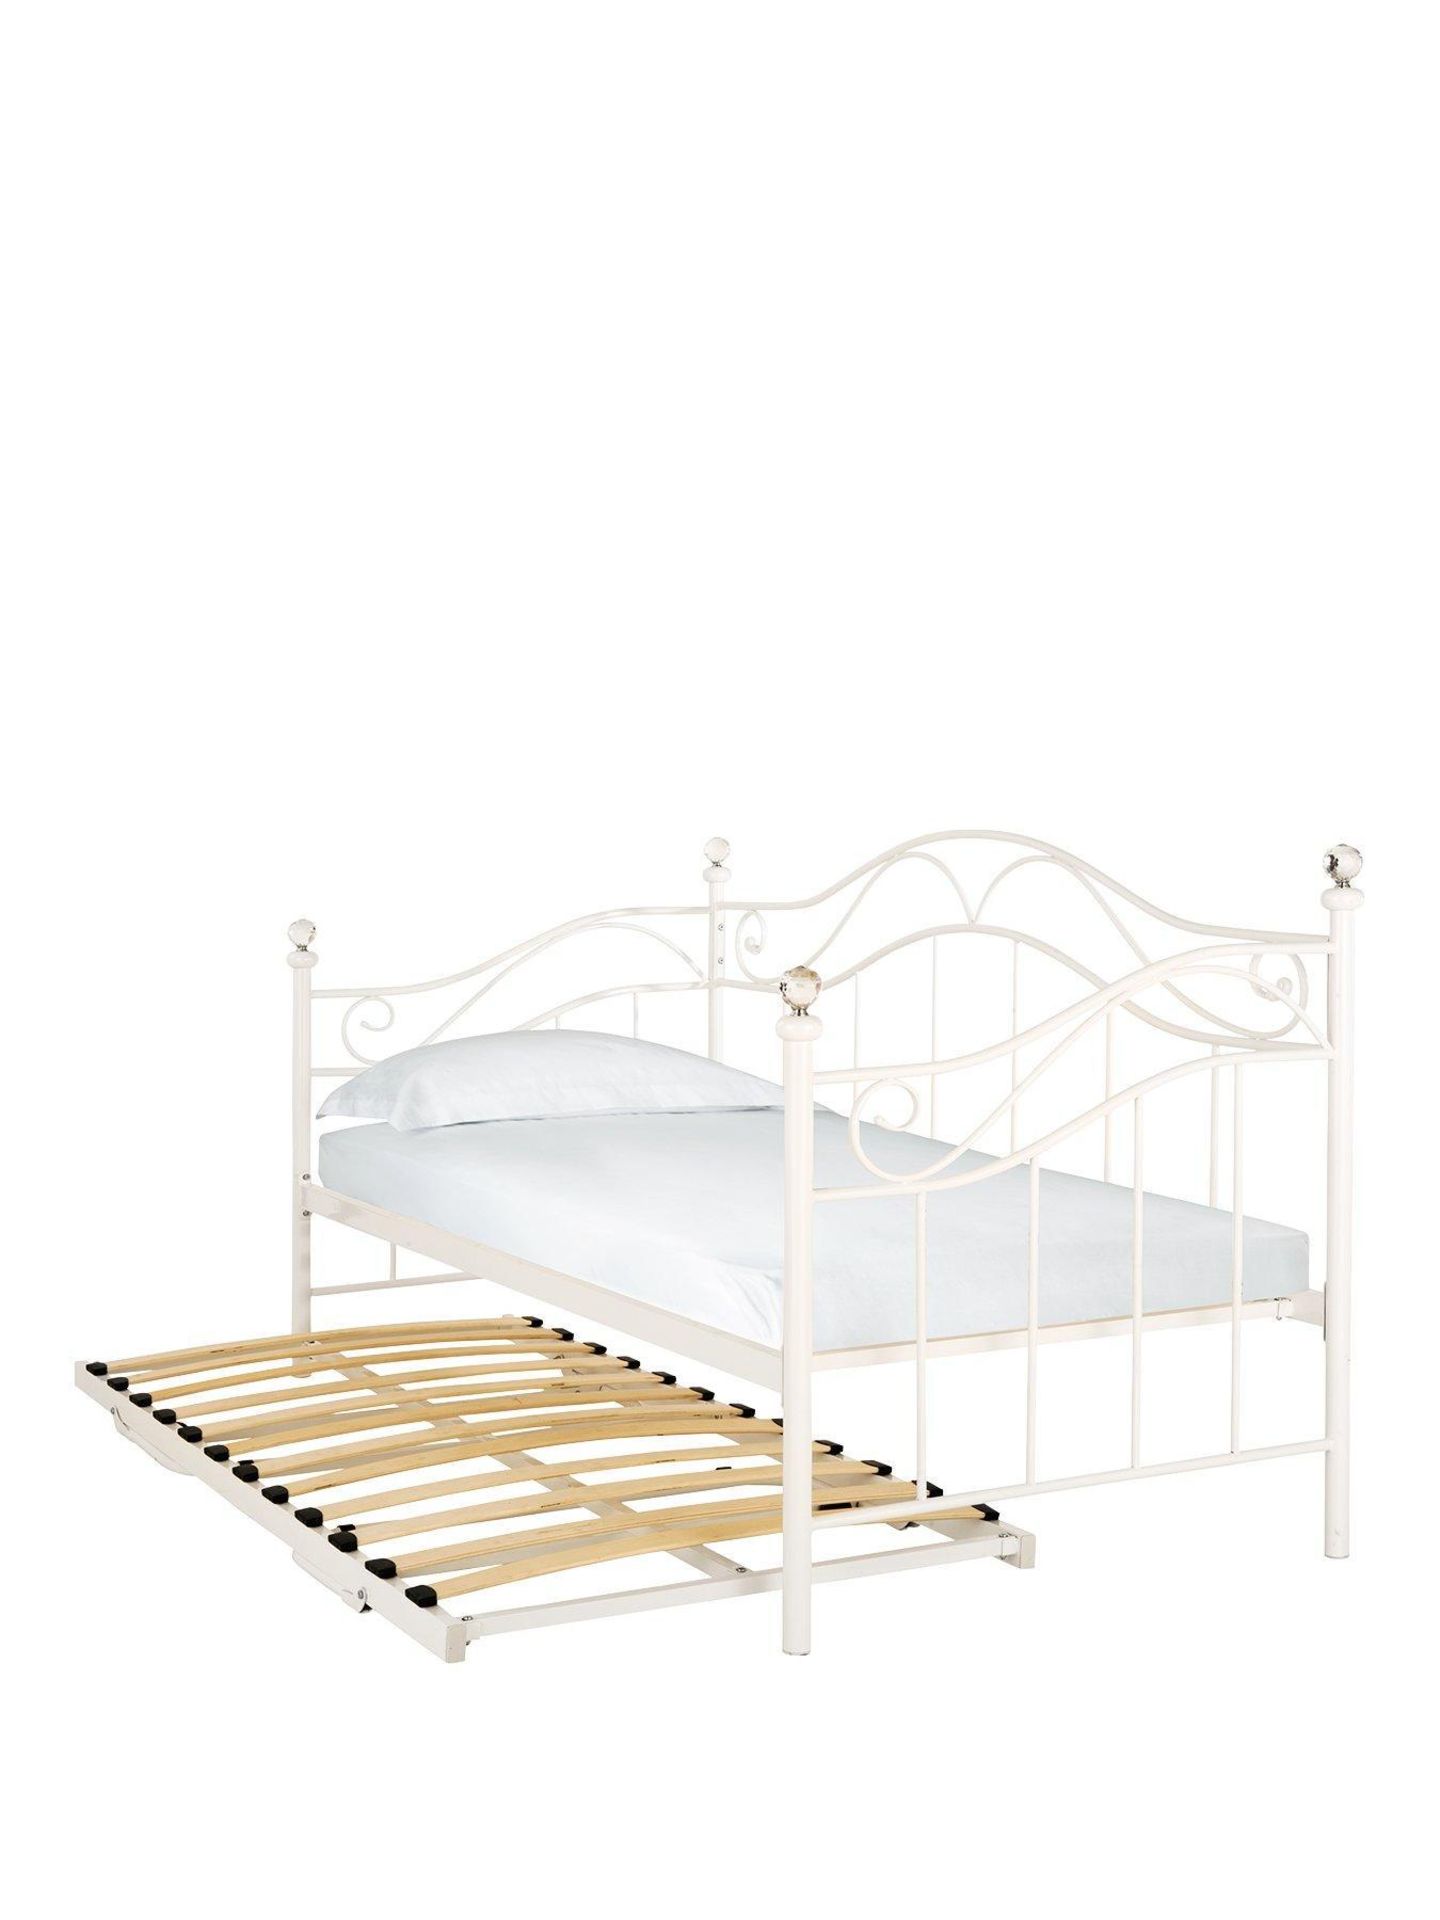 boxed item  stella single  daybed [white] 112x97x202cm rrp:£490.0